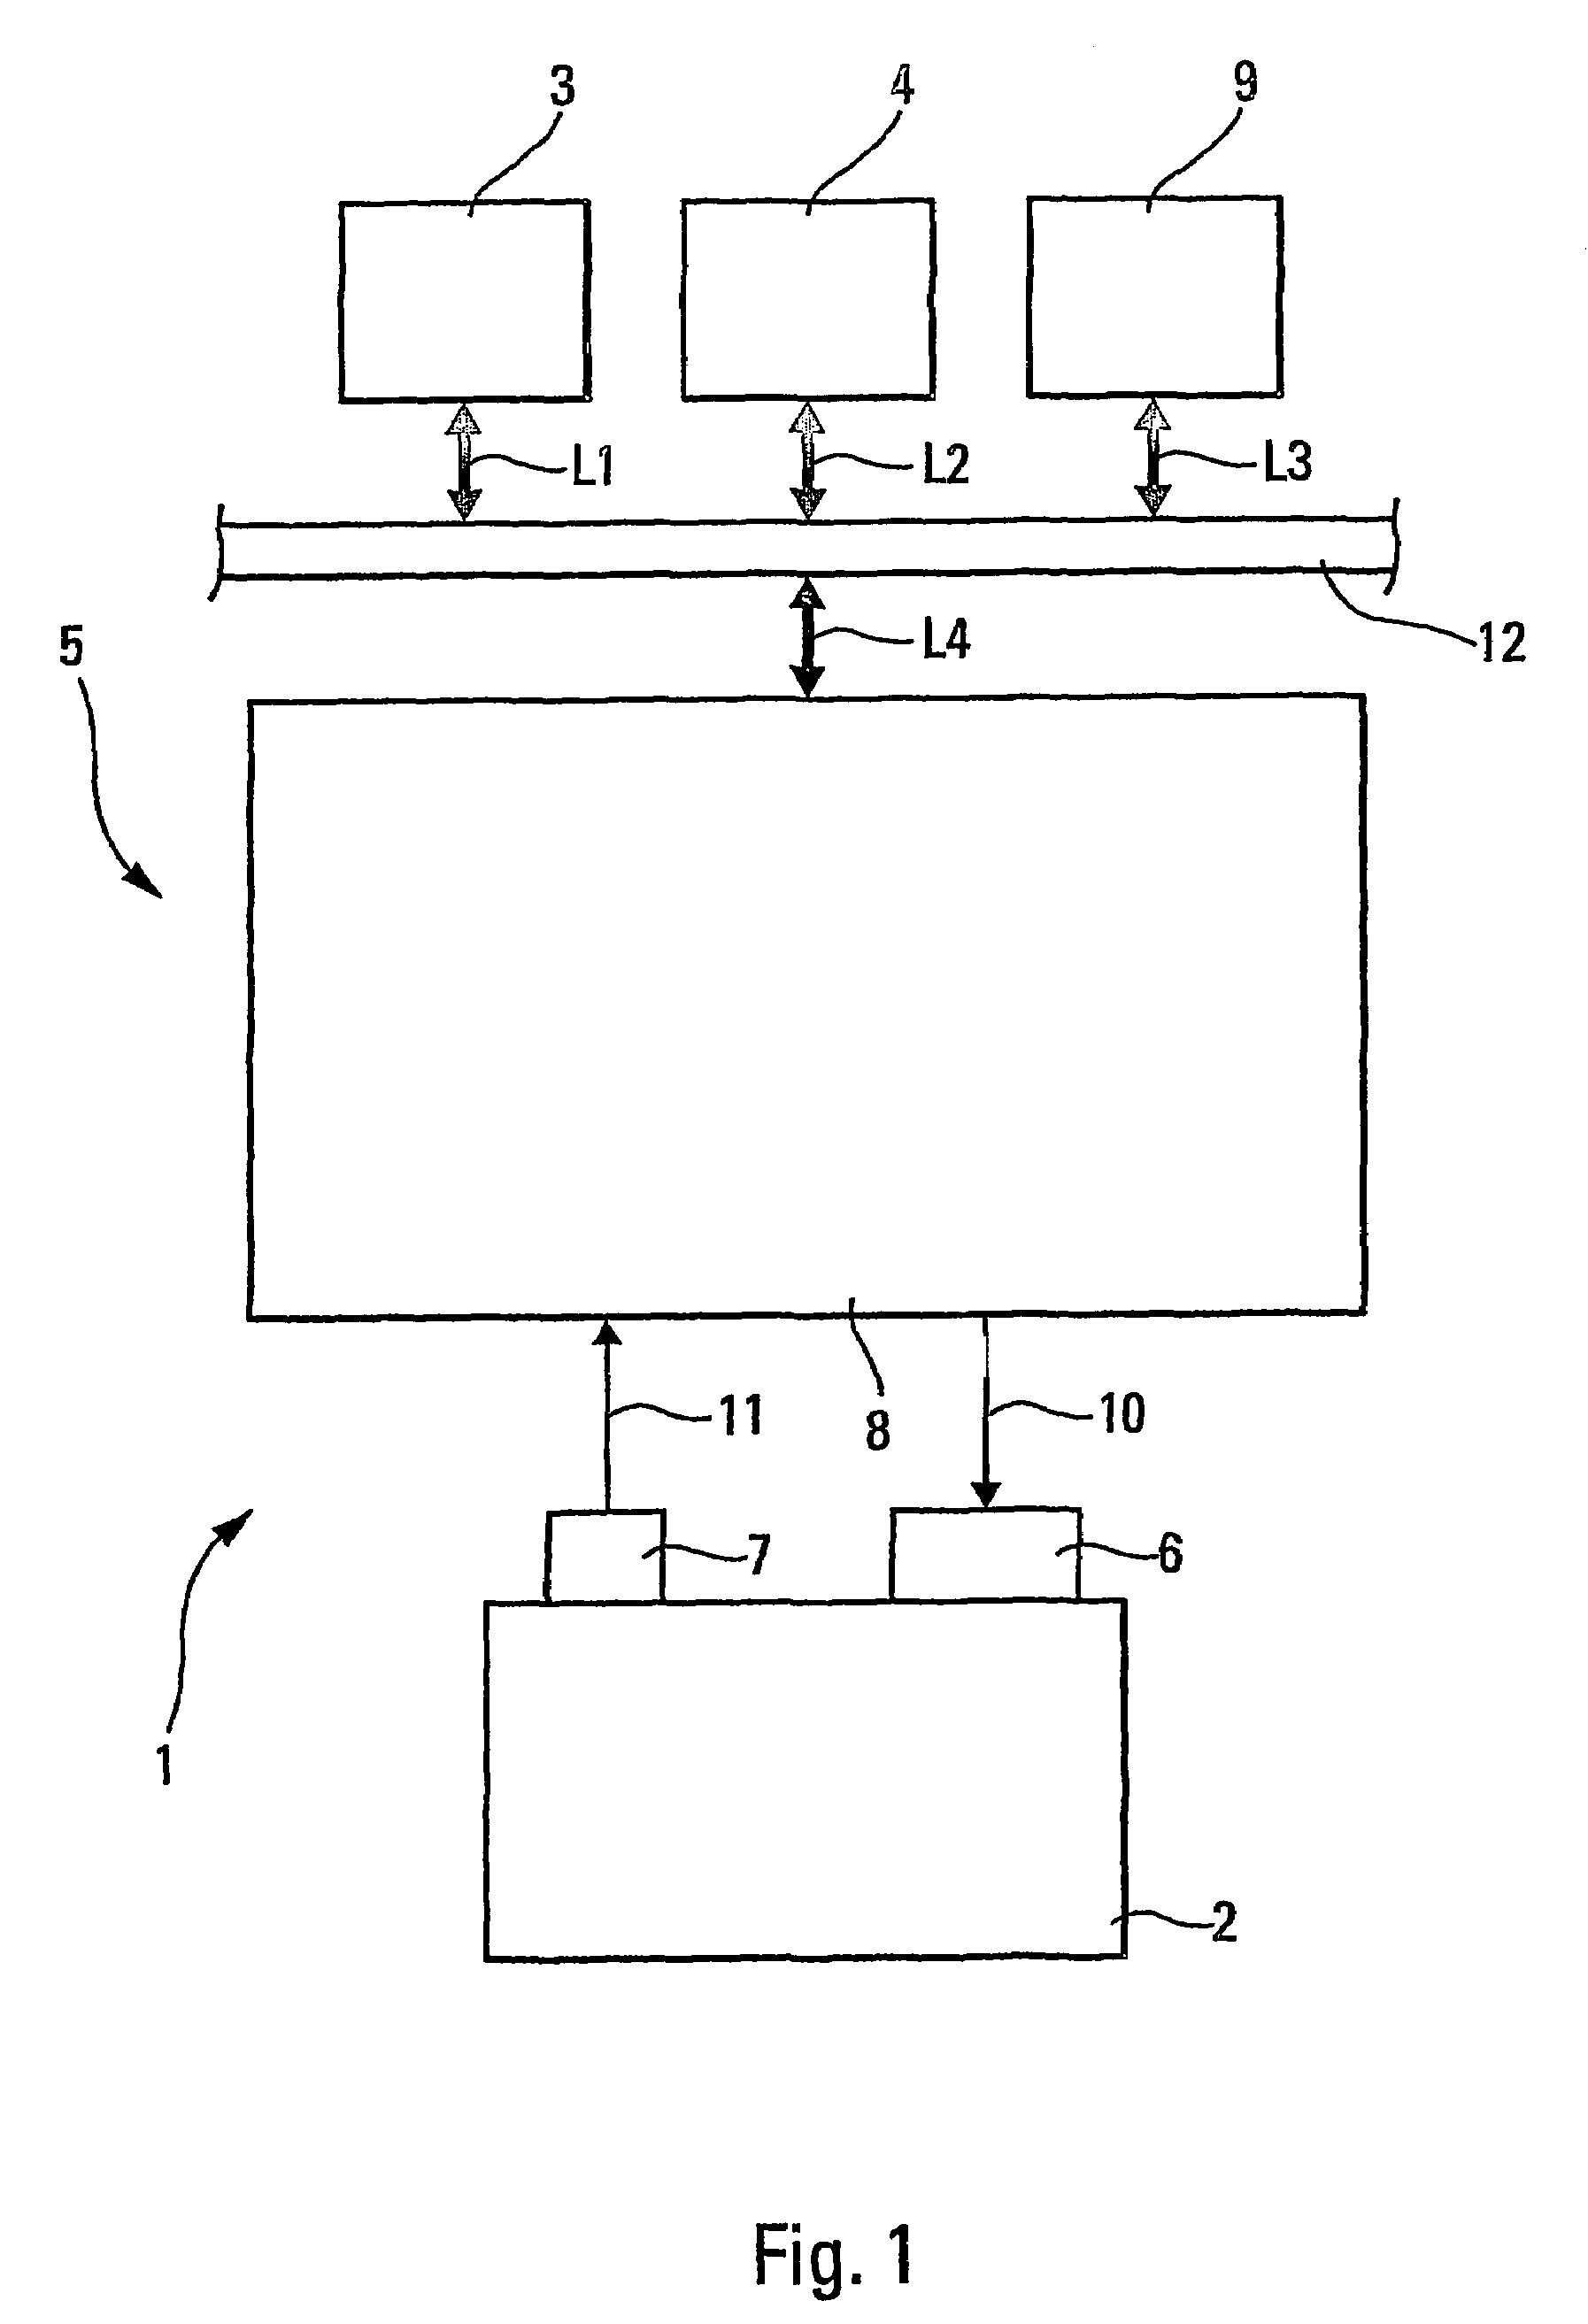 System for controlling the operation of at least one aircraft engine